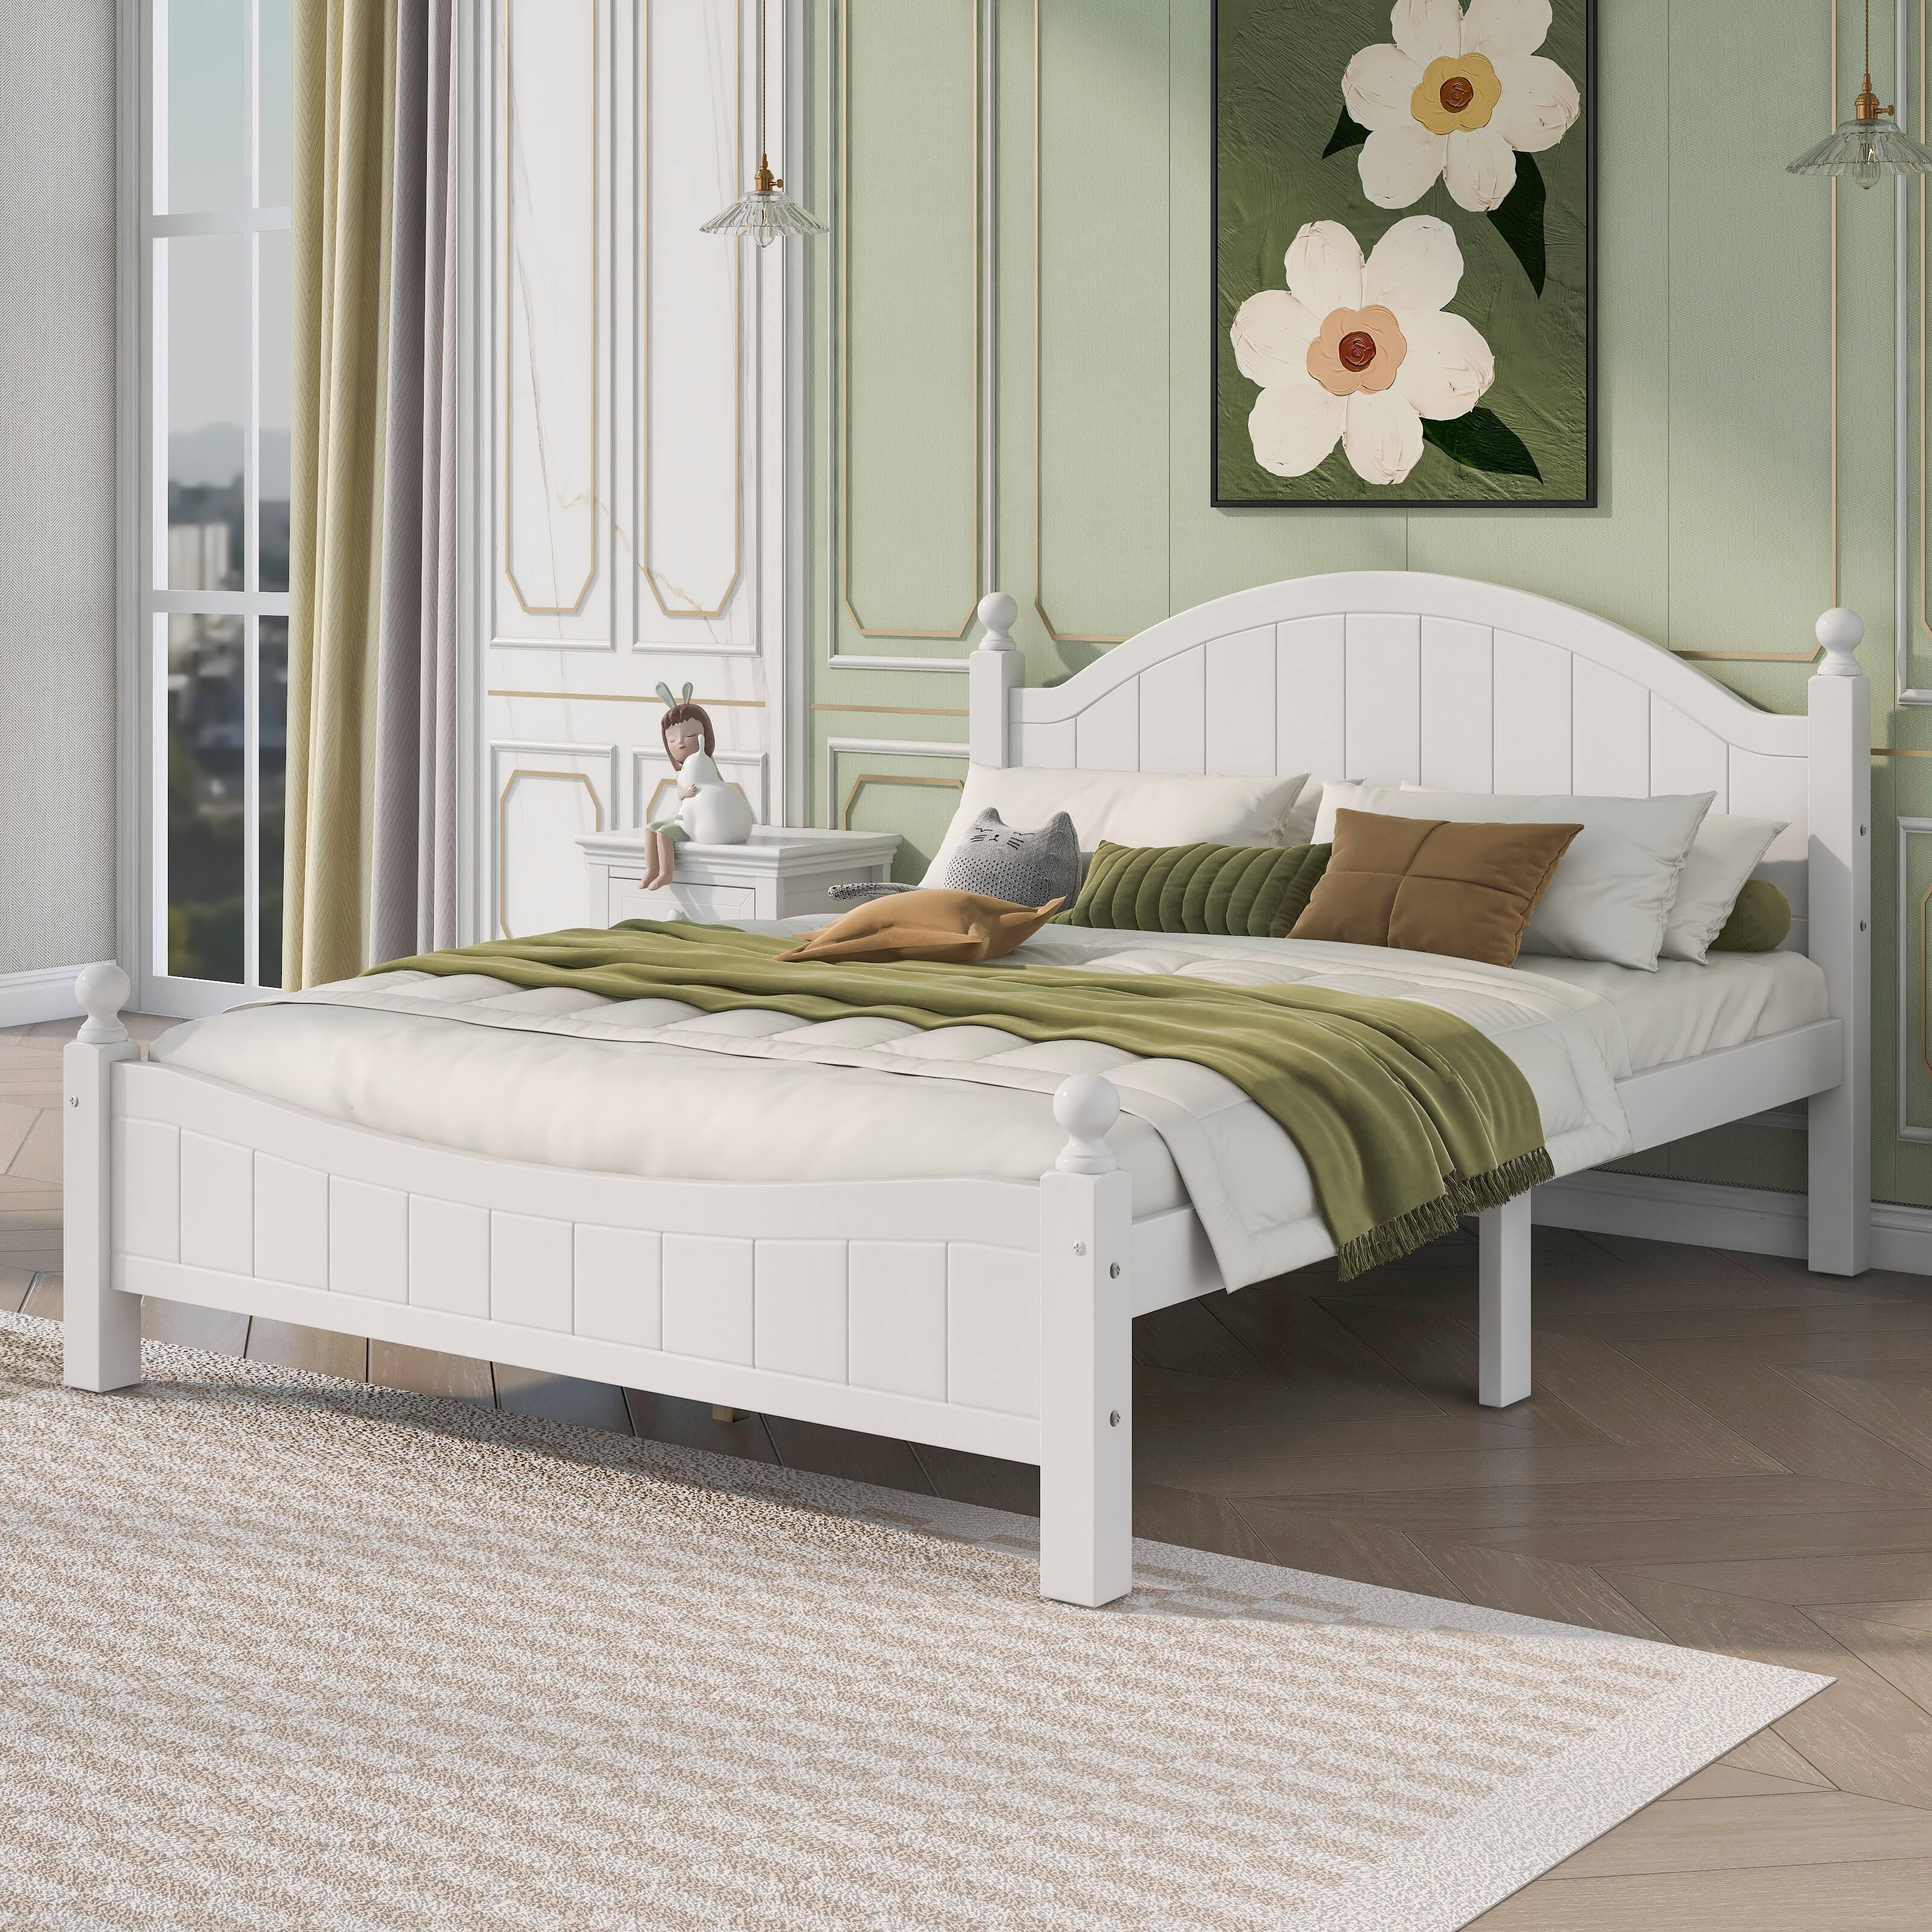 Traditional Concise Style White Solid Wood Platform Bed, No Need Box ...